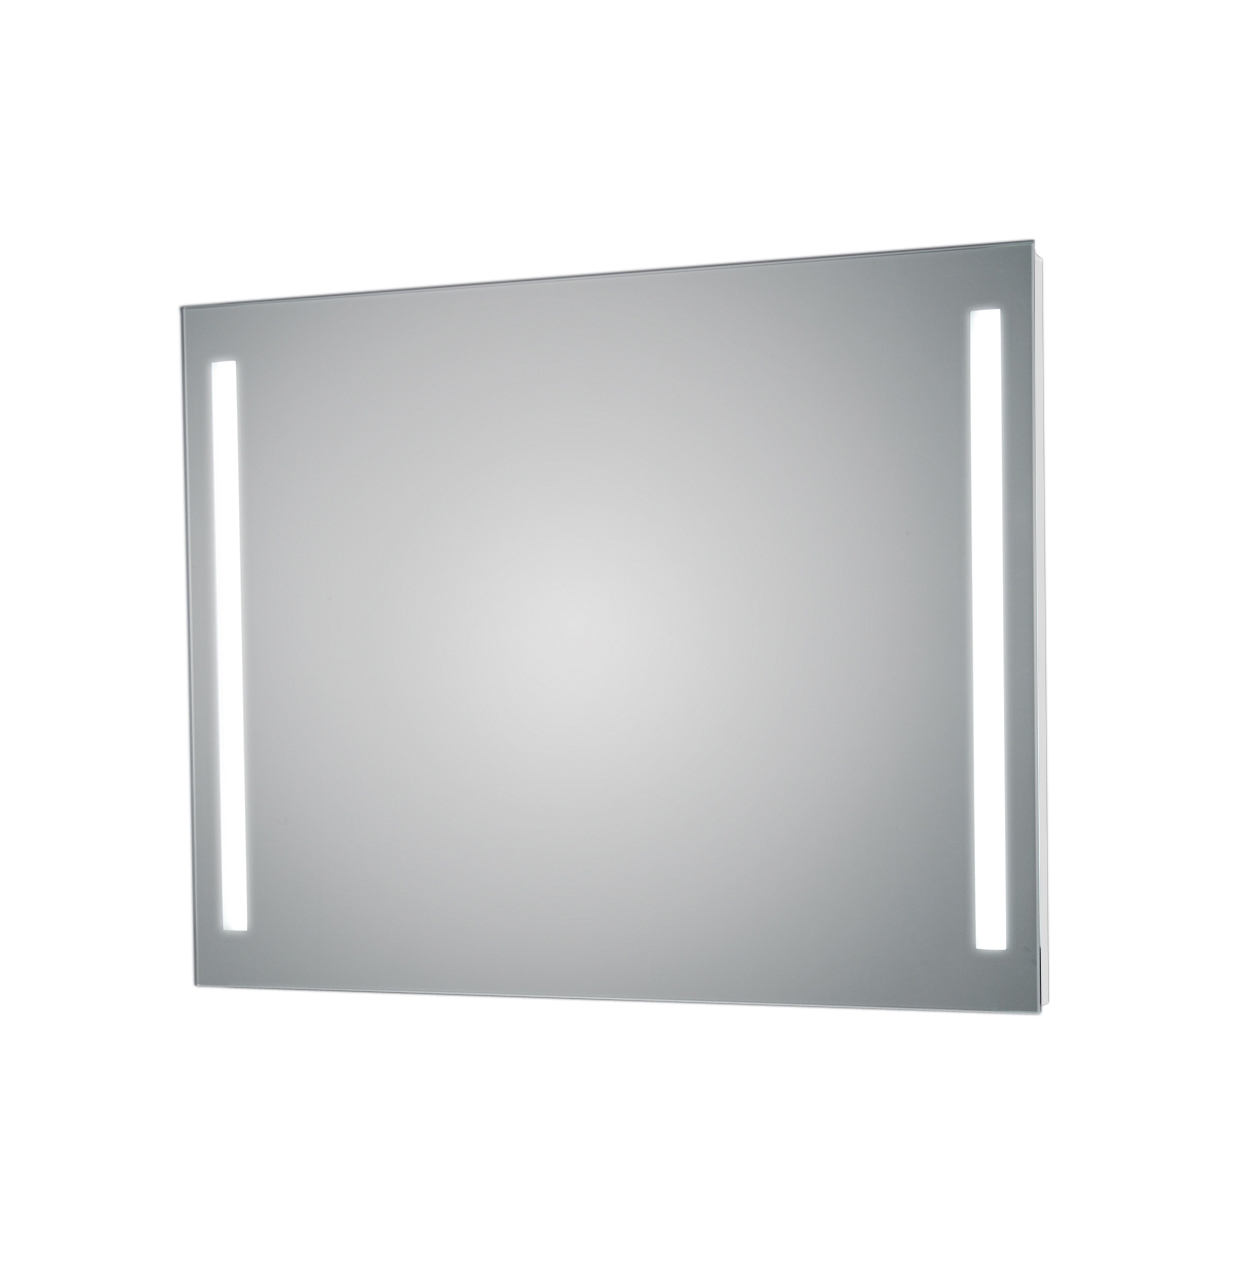 T5-2 mirror with LEd light 23.6 x 31.5